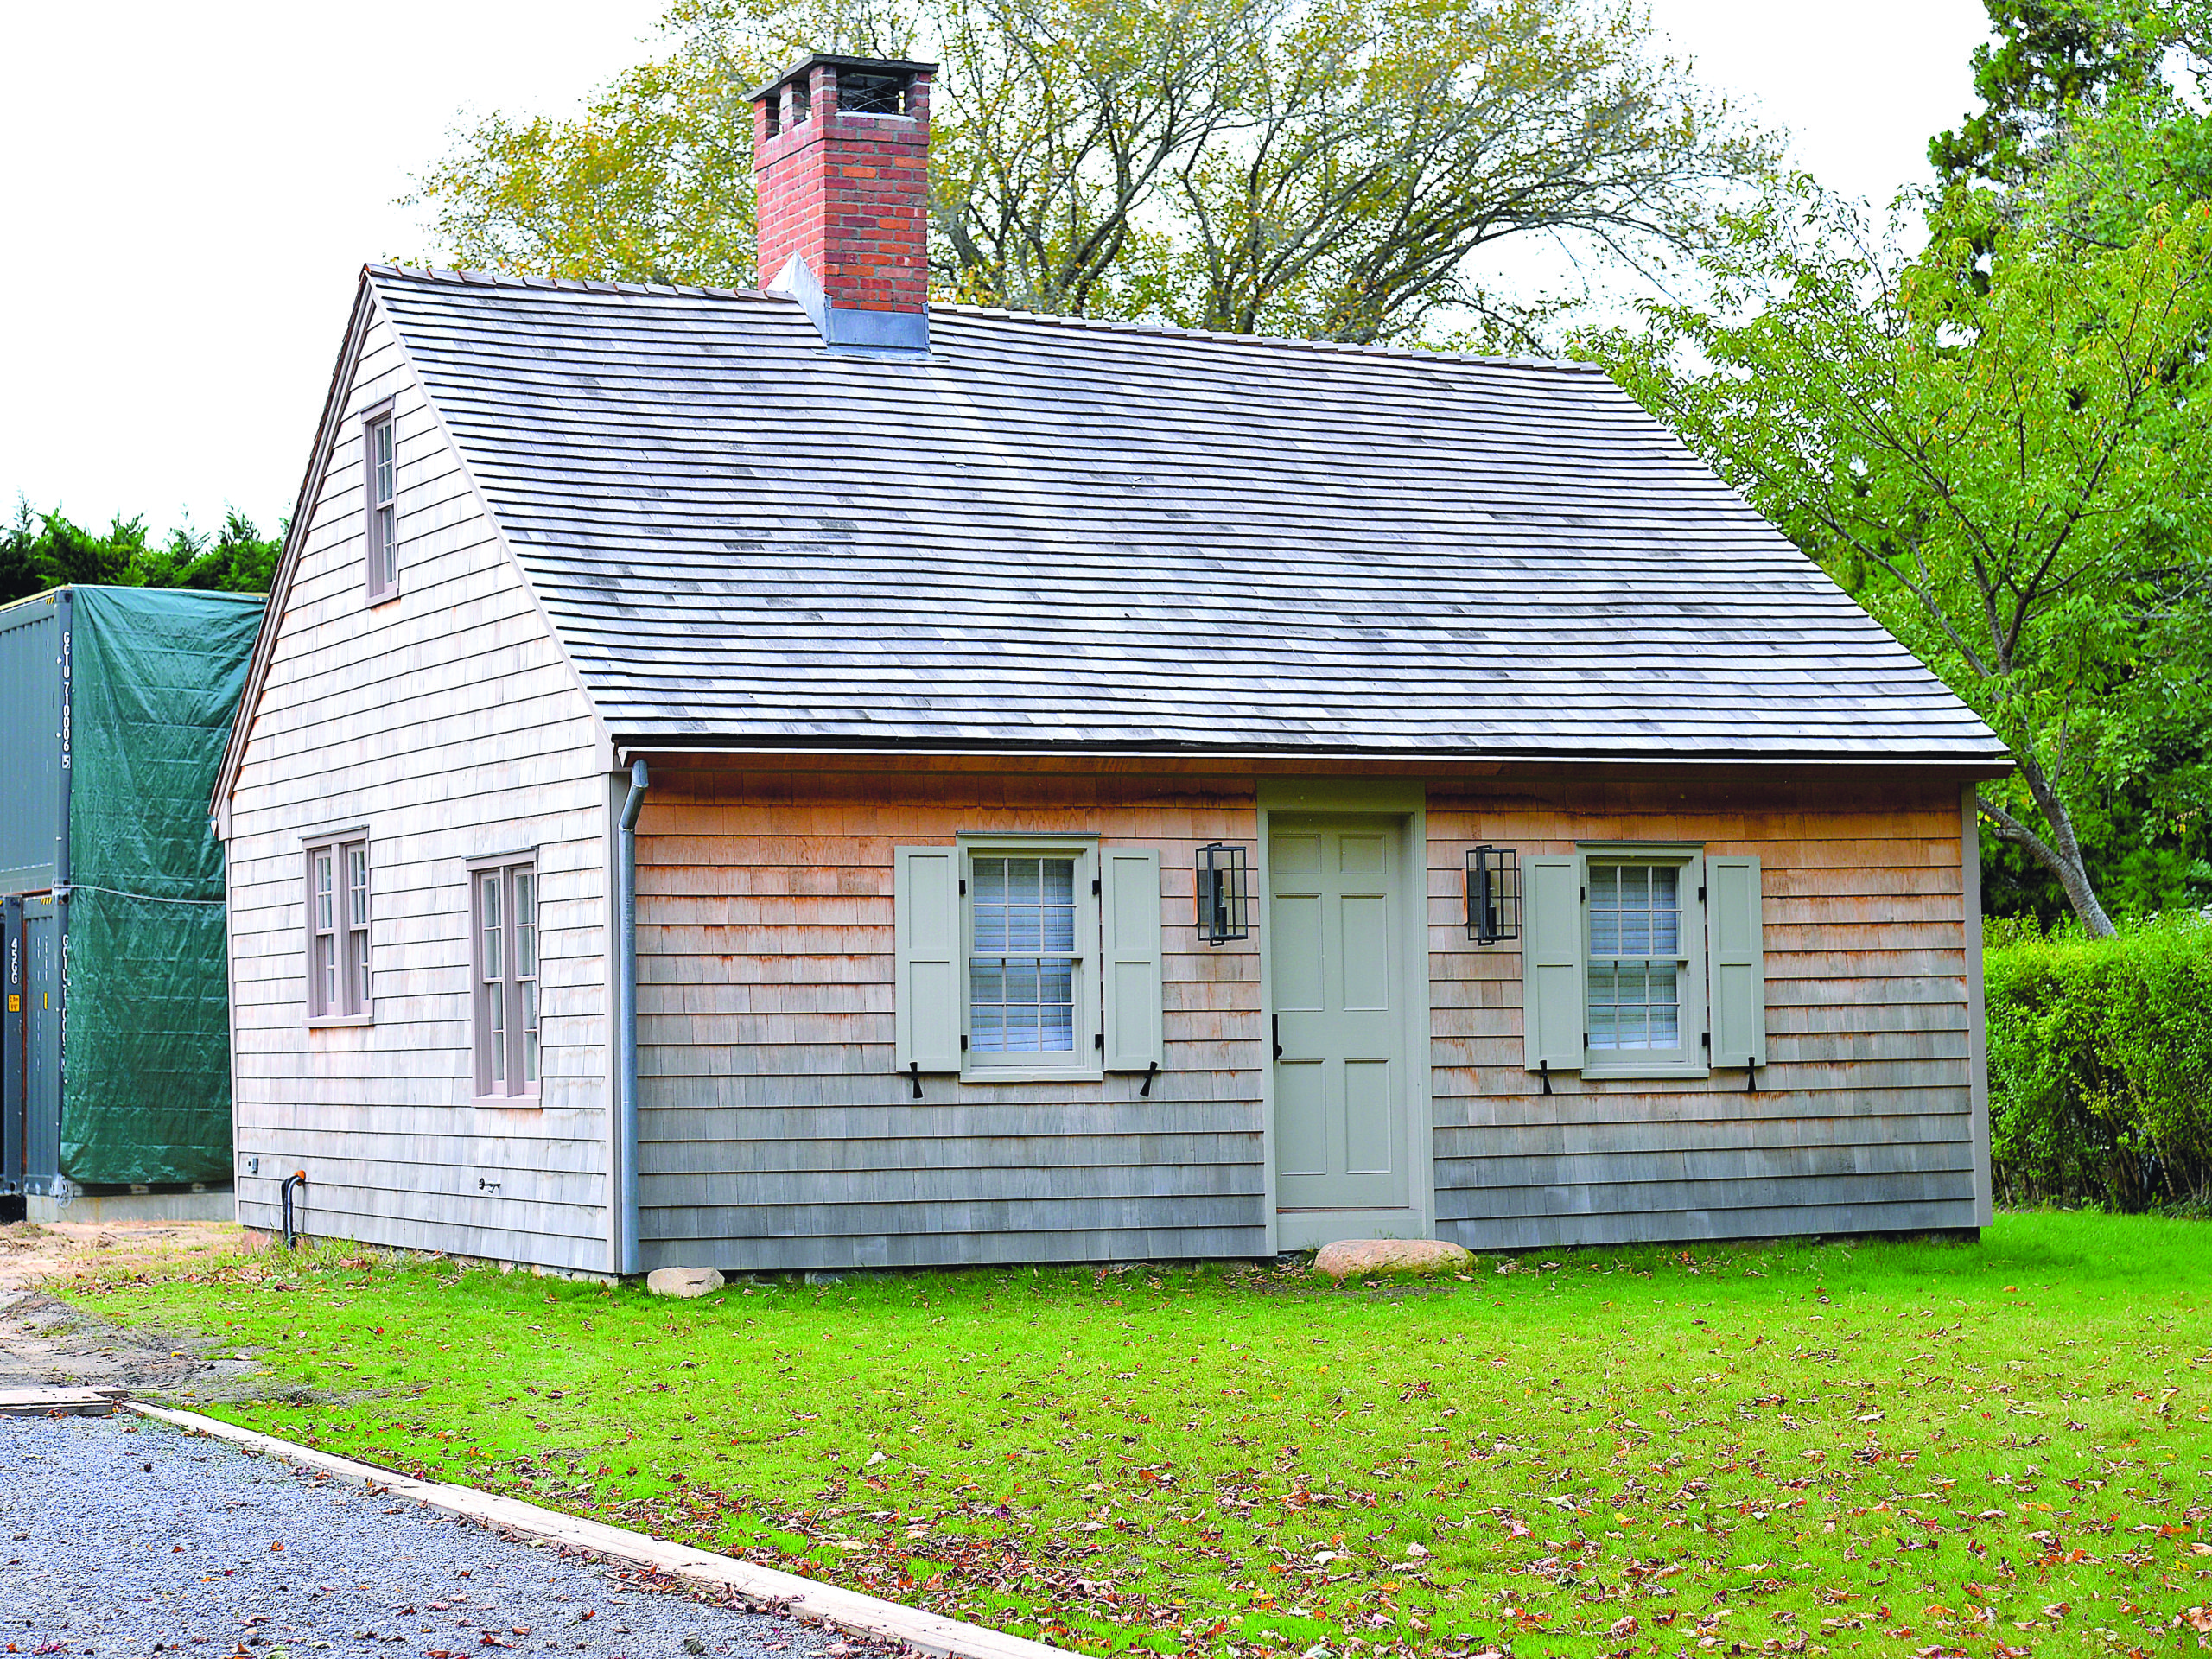 October 17 -- It was six years ago when East Hampton Village adopted its timber-frame landmarks law to protect historic buildings and incentivize their restoration. Now, the village is seeing the fruits of that legislation — the first of its kind. The Hiram Sanford House, a Cape Codstyle dwelling at 13 Egypt Lane that was once the home of the man who ran the Pantigo Windmill, has been restored, with its surviving historic details preserved. The work has been done in conjunction with the ongoing construction of a modern home on the same piece of property.